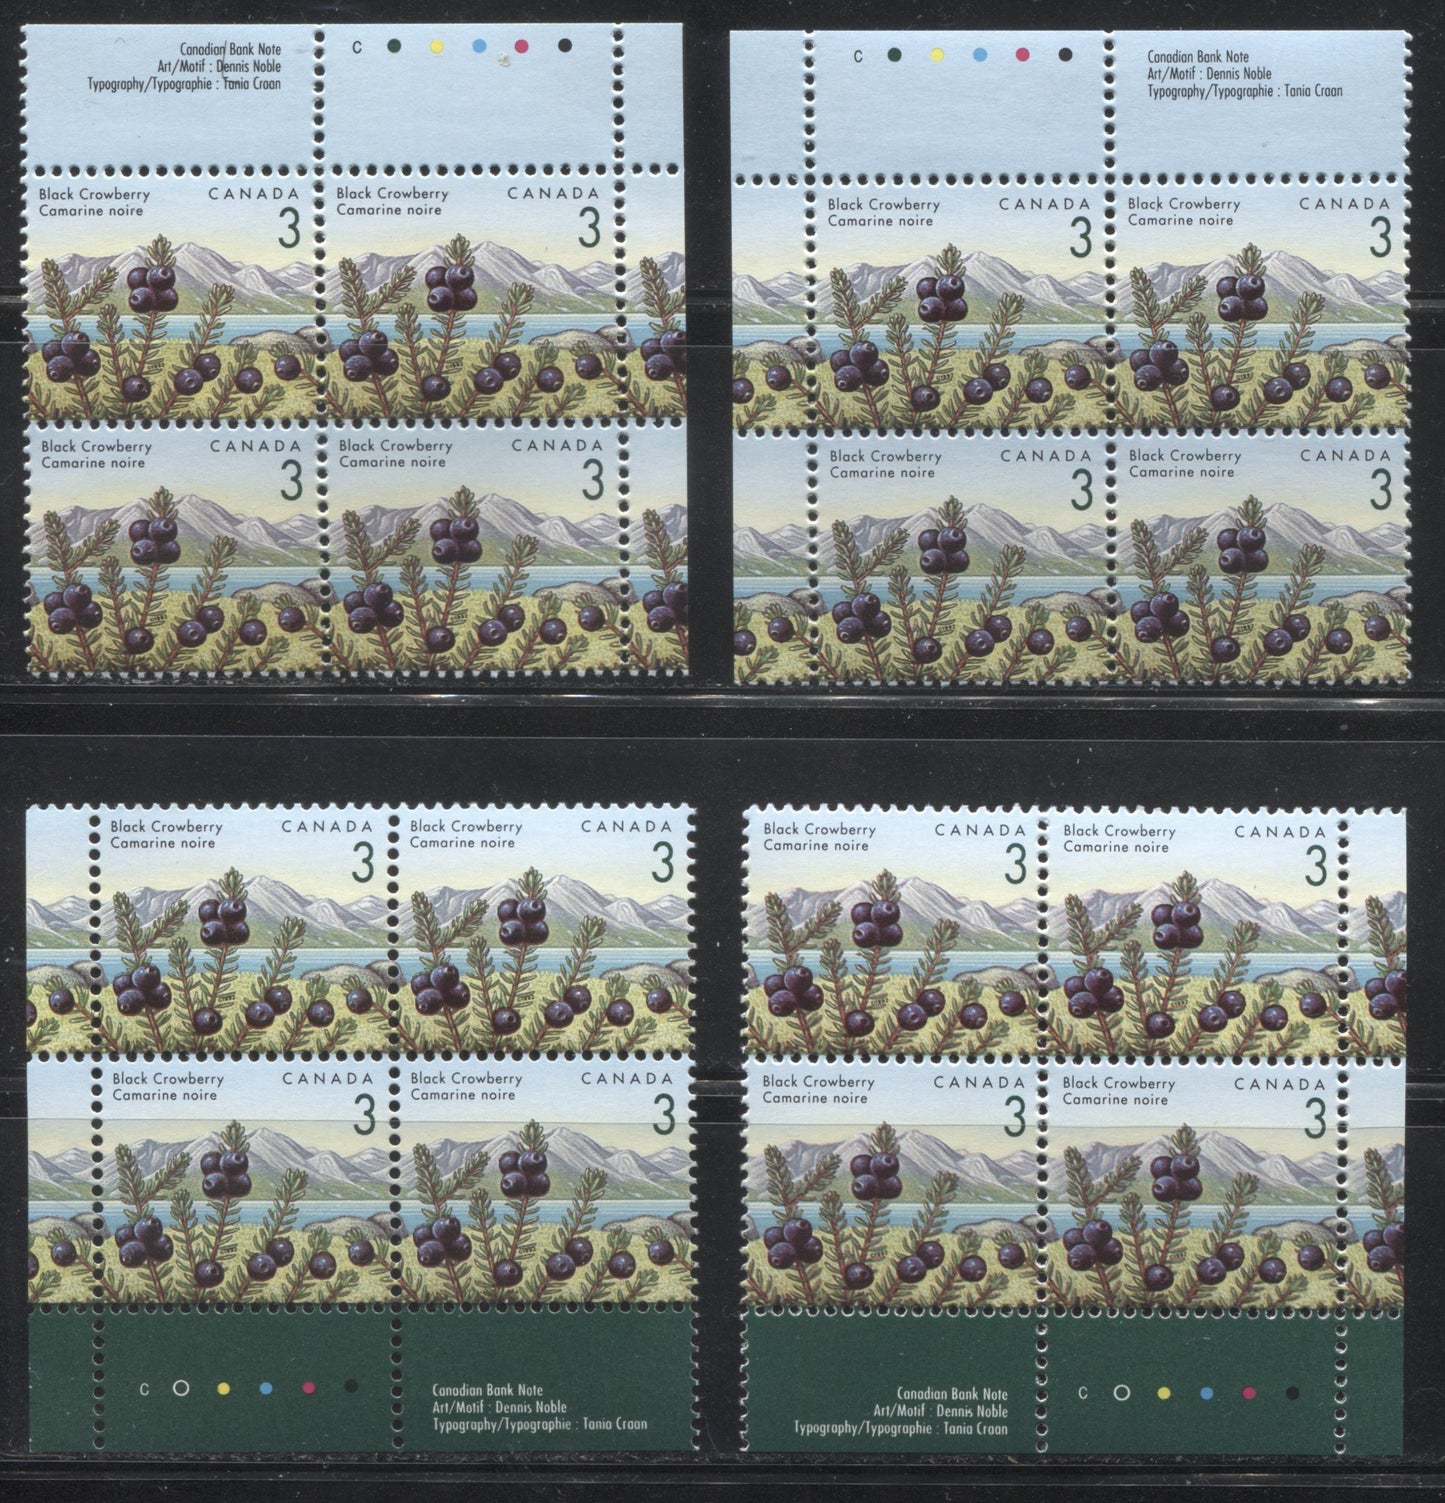 Canada #1351ii 3c Black Crowberry, 1991-1998 Fruit & Flag Definitive Issue, A VFNH Matched Set of Inscription Blocks, Canadian Bank Note Printing on Coated Papers Paper